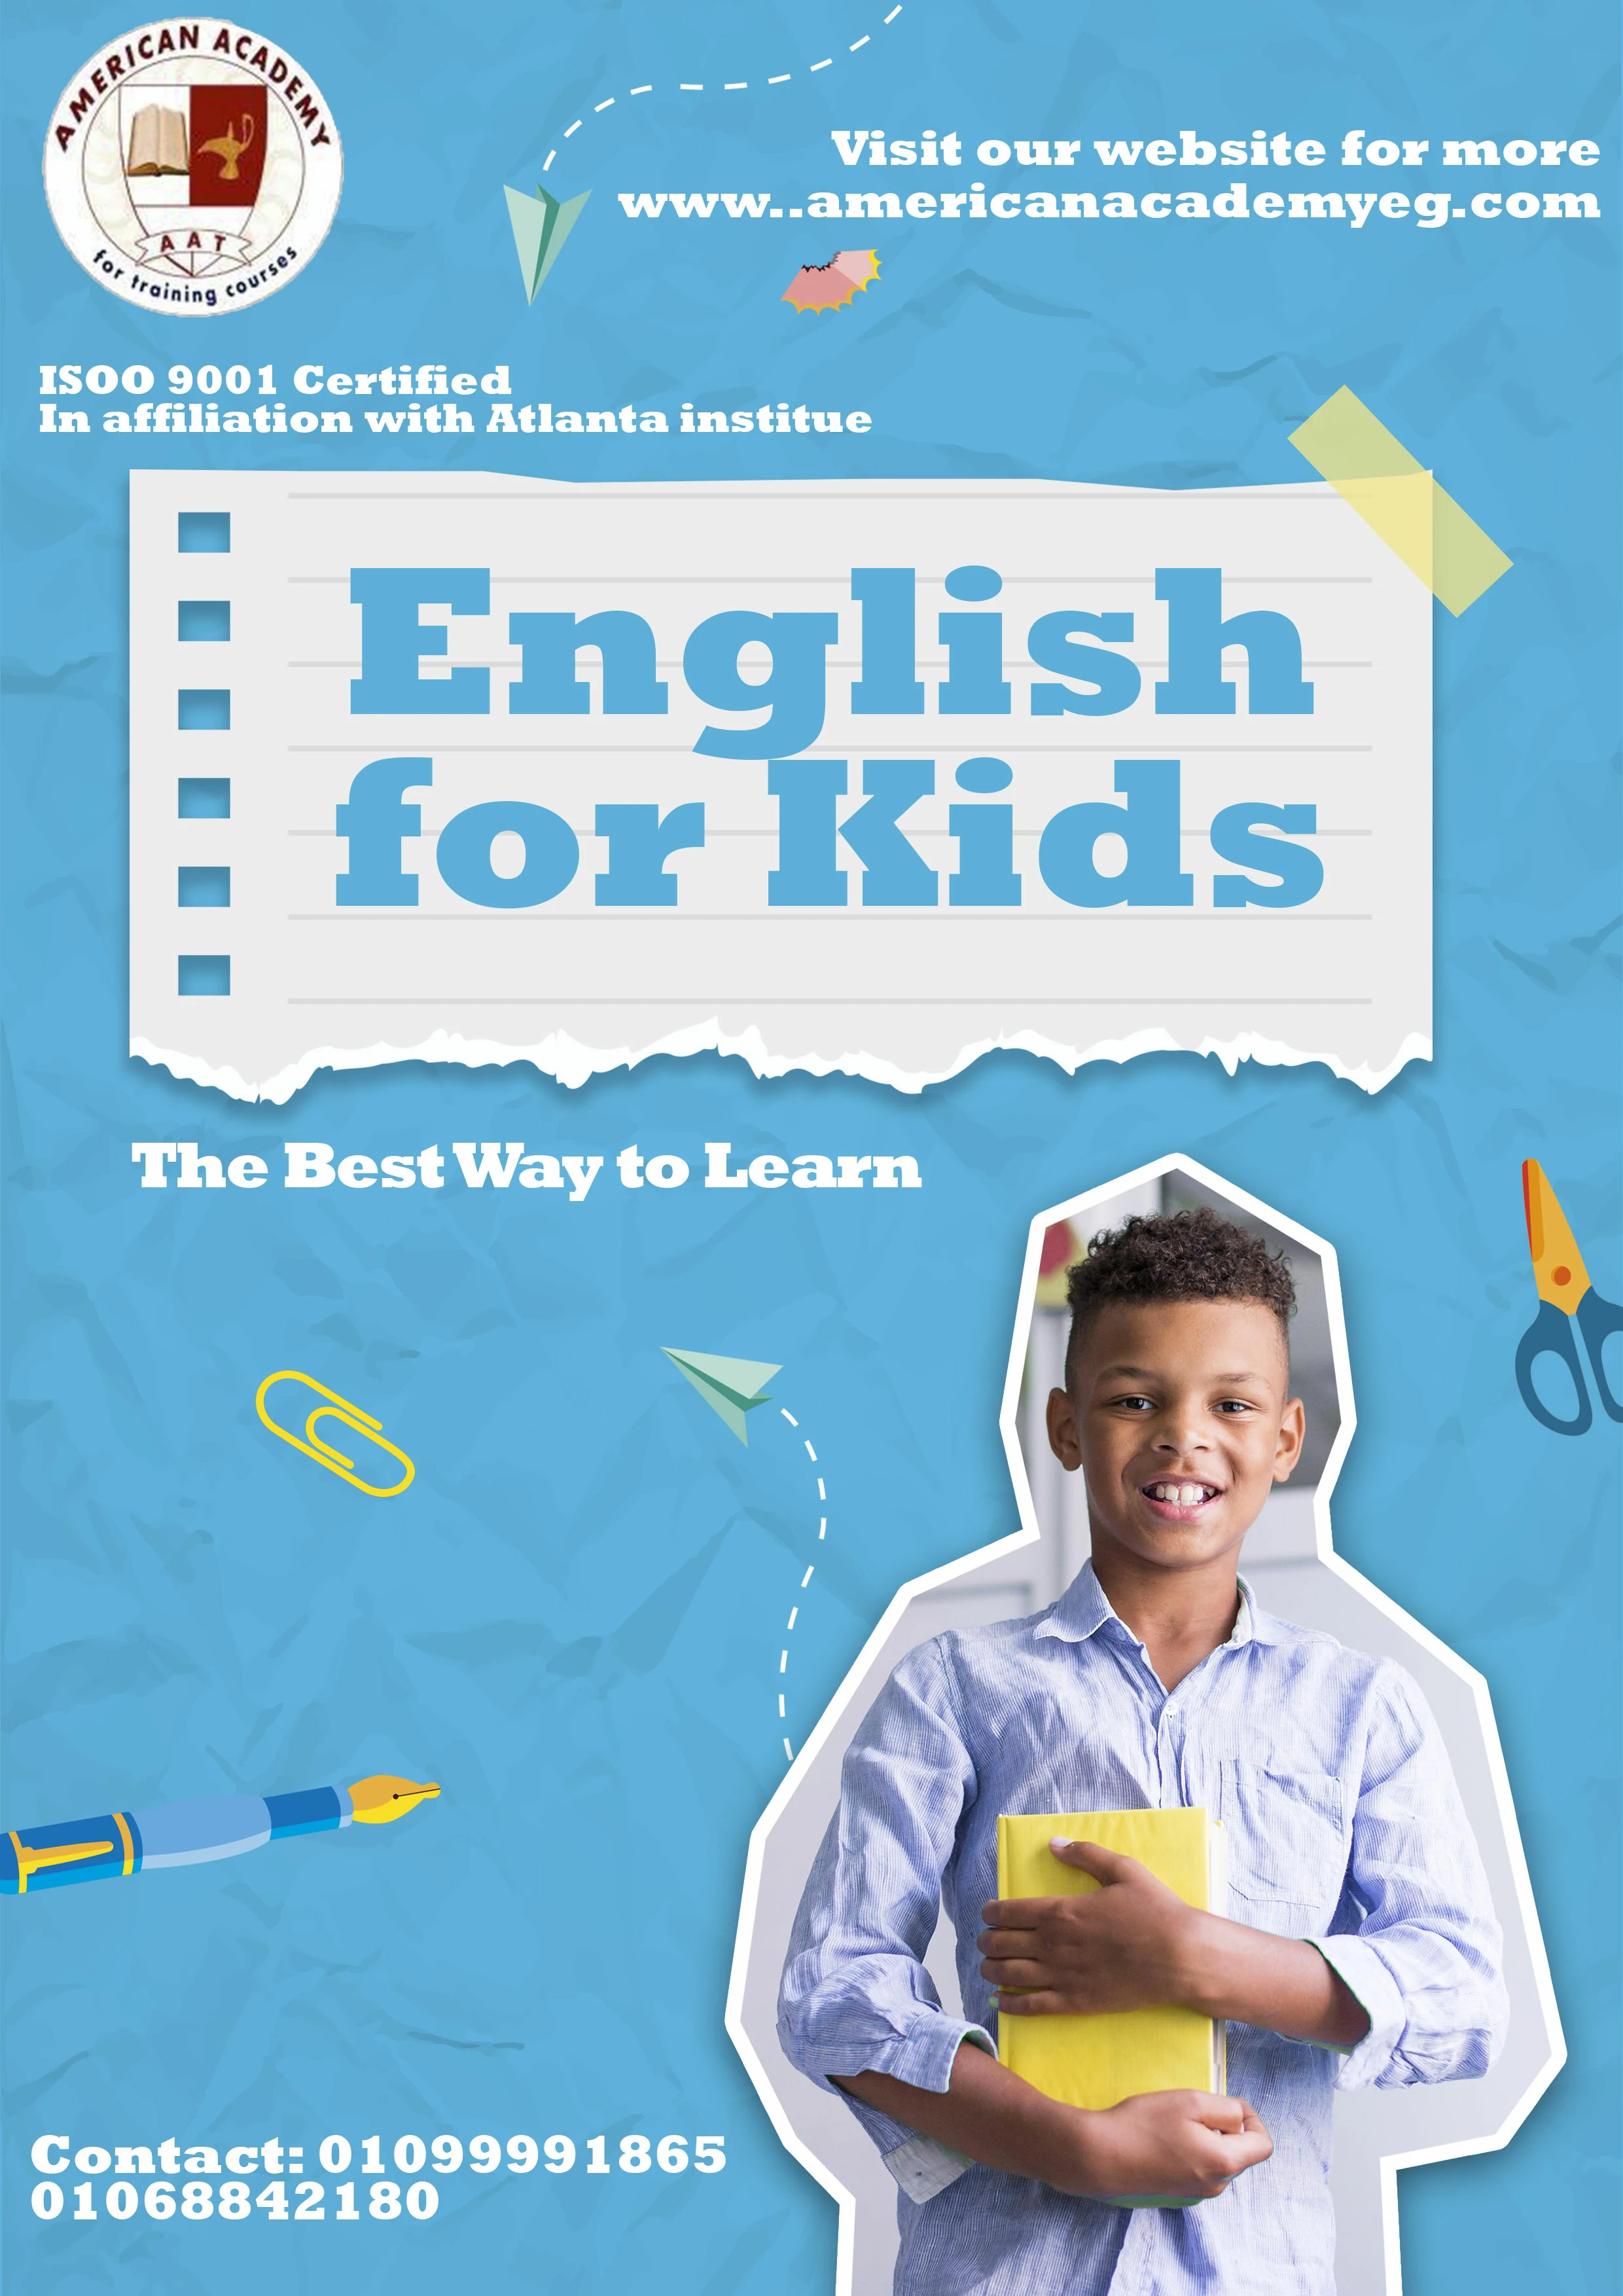 English for Kids courses